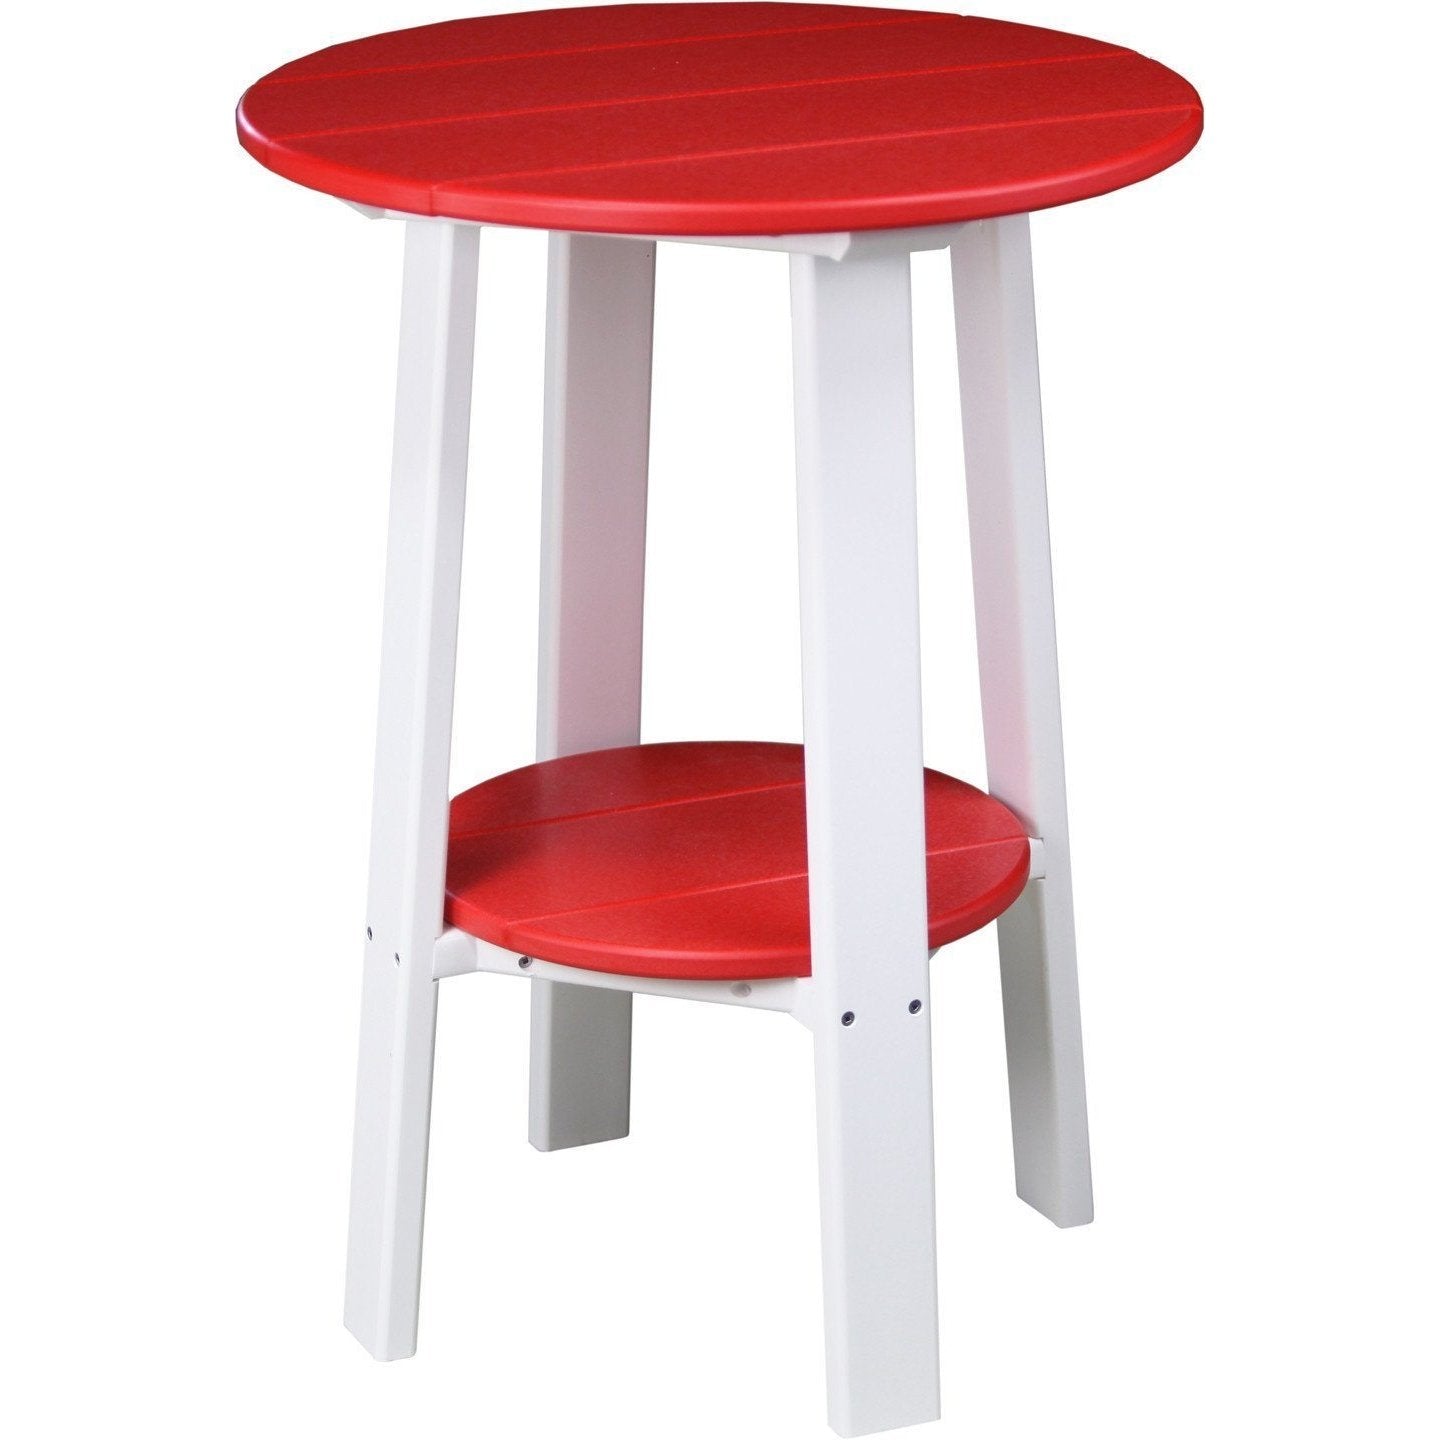 Outdoor 28" Deluxe End Table   Red & White